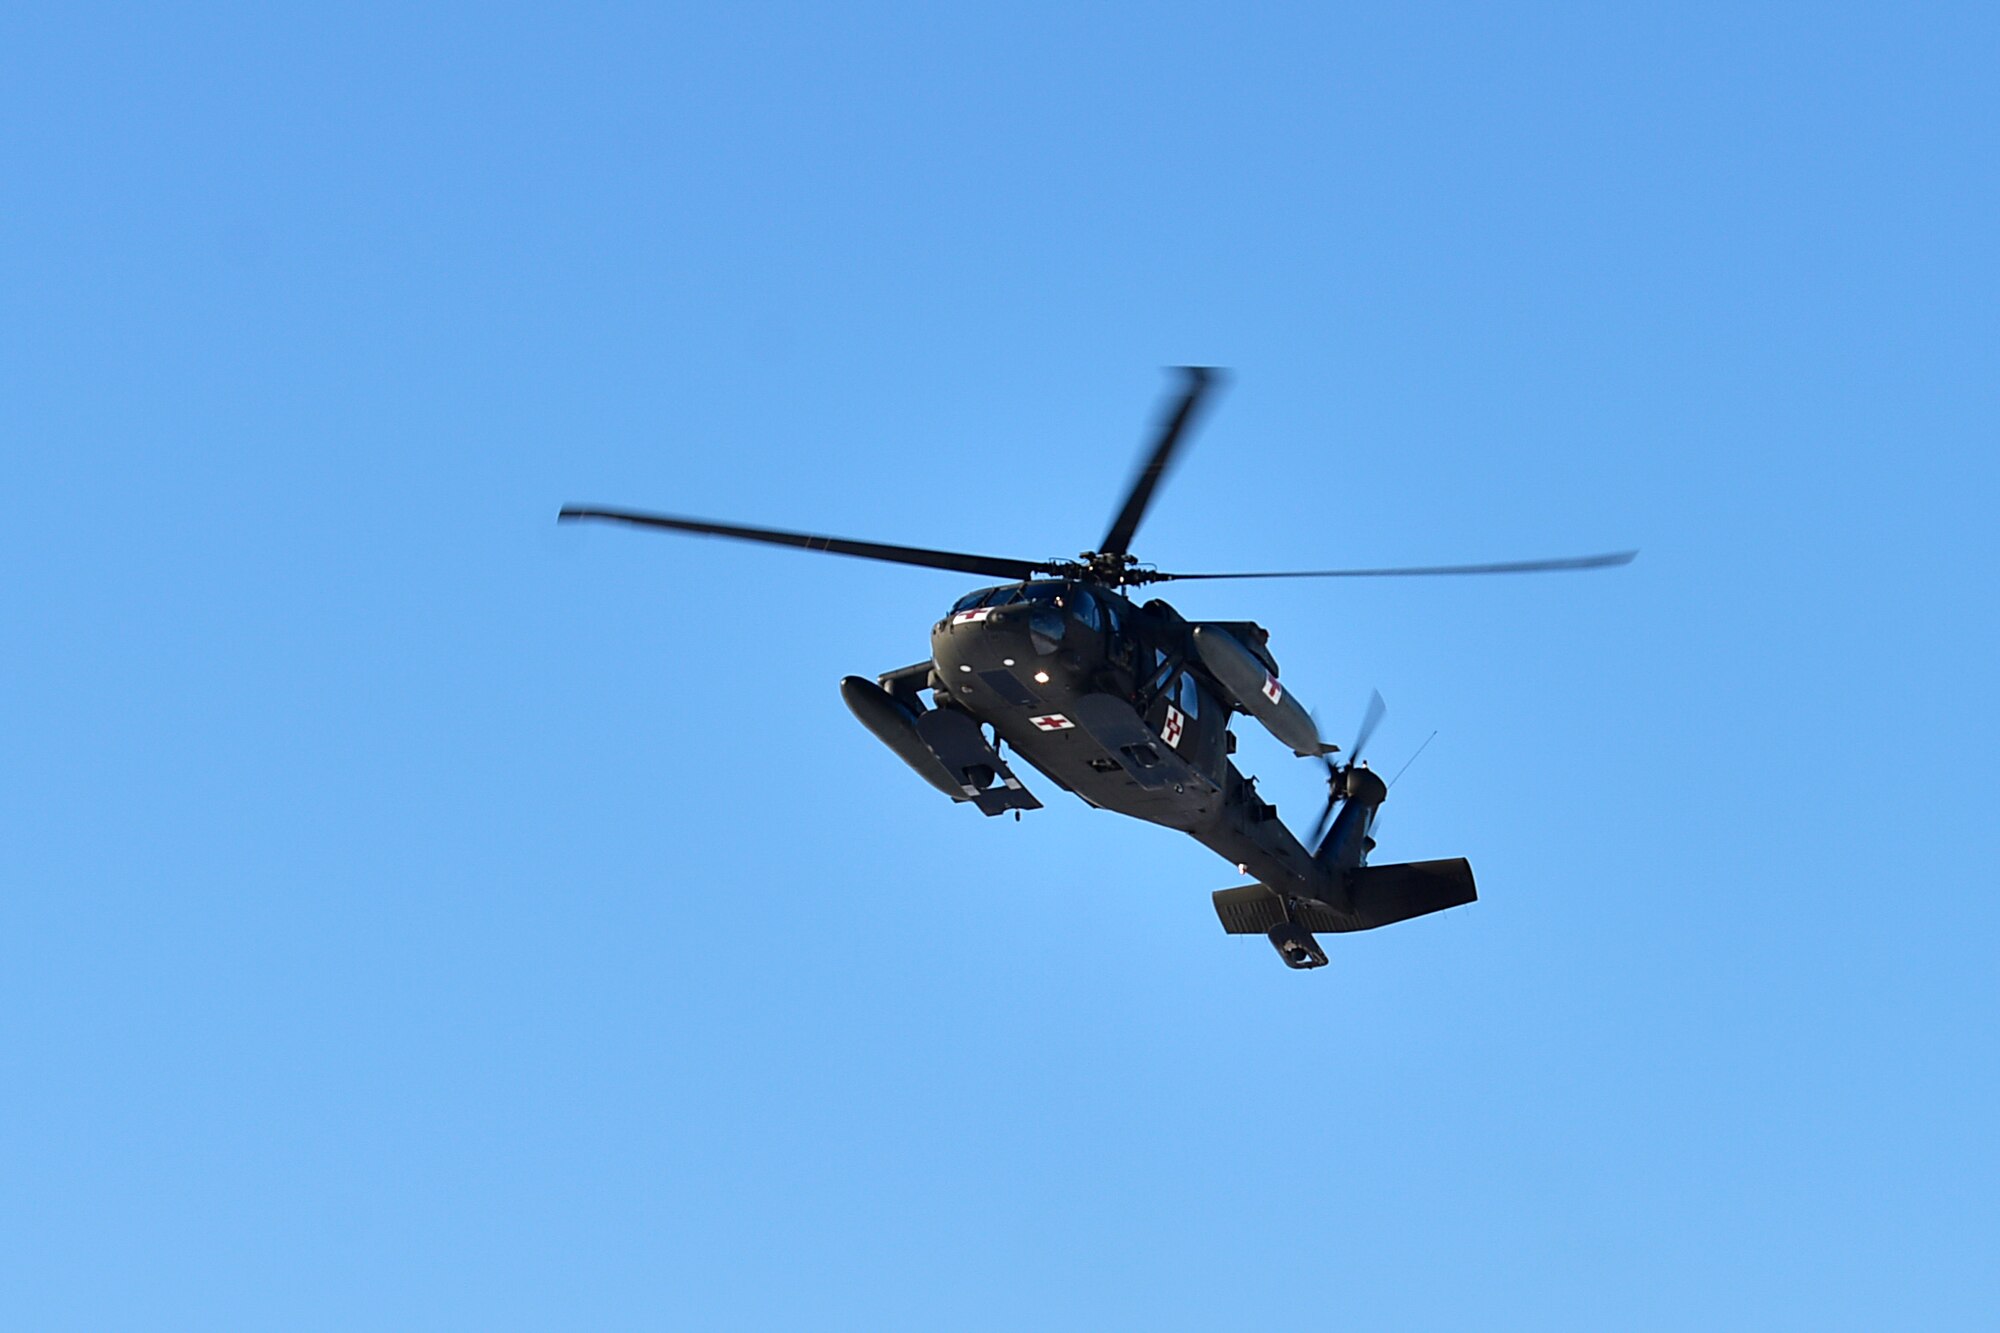 A UH-60 Blackhawk from 1-52D General Support Aviation Battalion flies over during a medical evacuation (MEDEVAC) exercise on Eielson Air Force Base, Alaska, Feb. 26, 2020. This particular Blackhawk is designed for MEDEVACs and is able to evacuate casualties in different austere environments. (U.S. Air Force photo by Senior Airman Beaux Hebert)